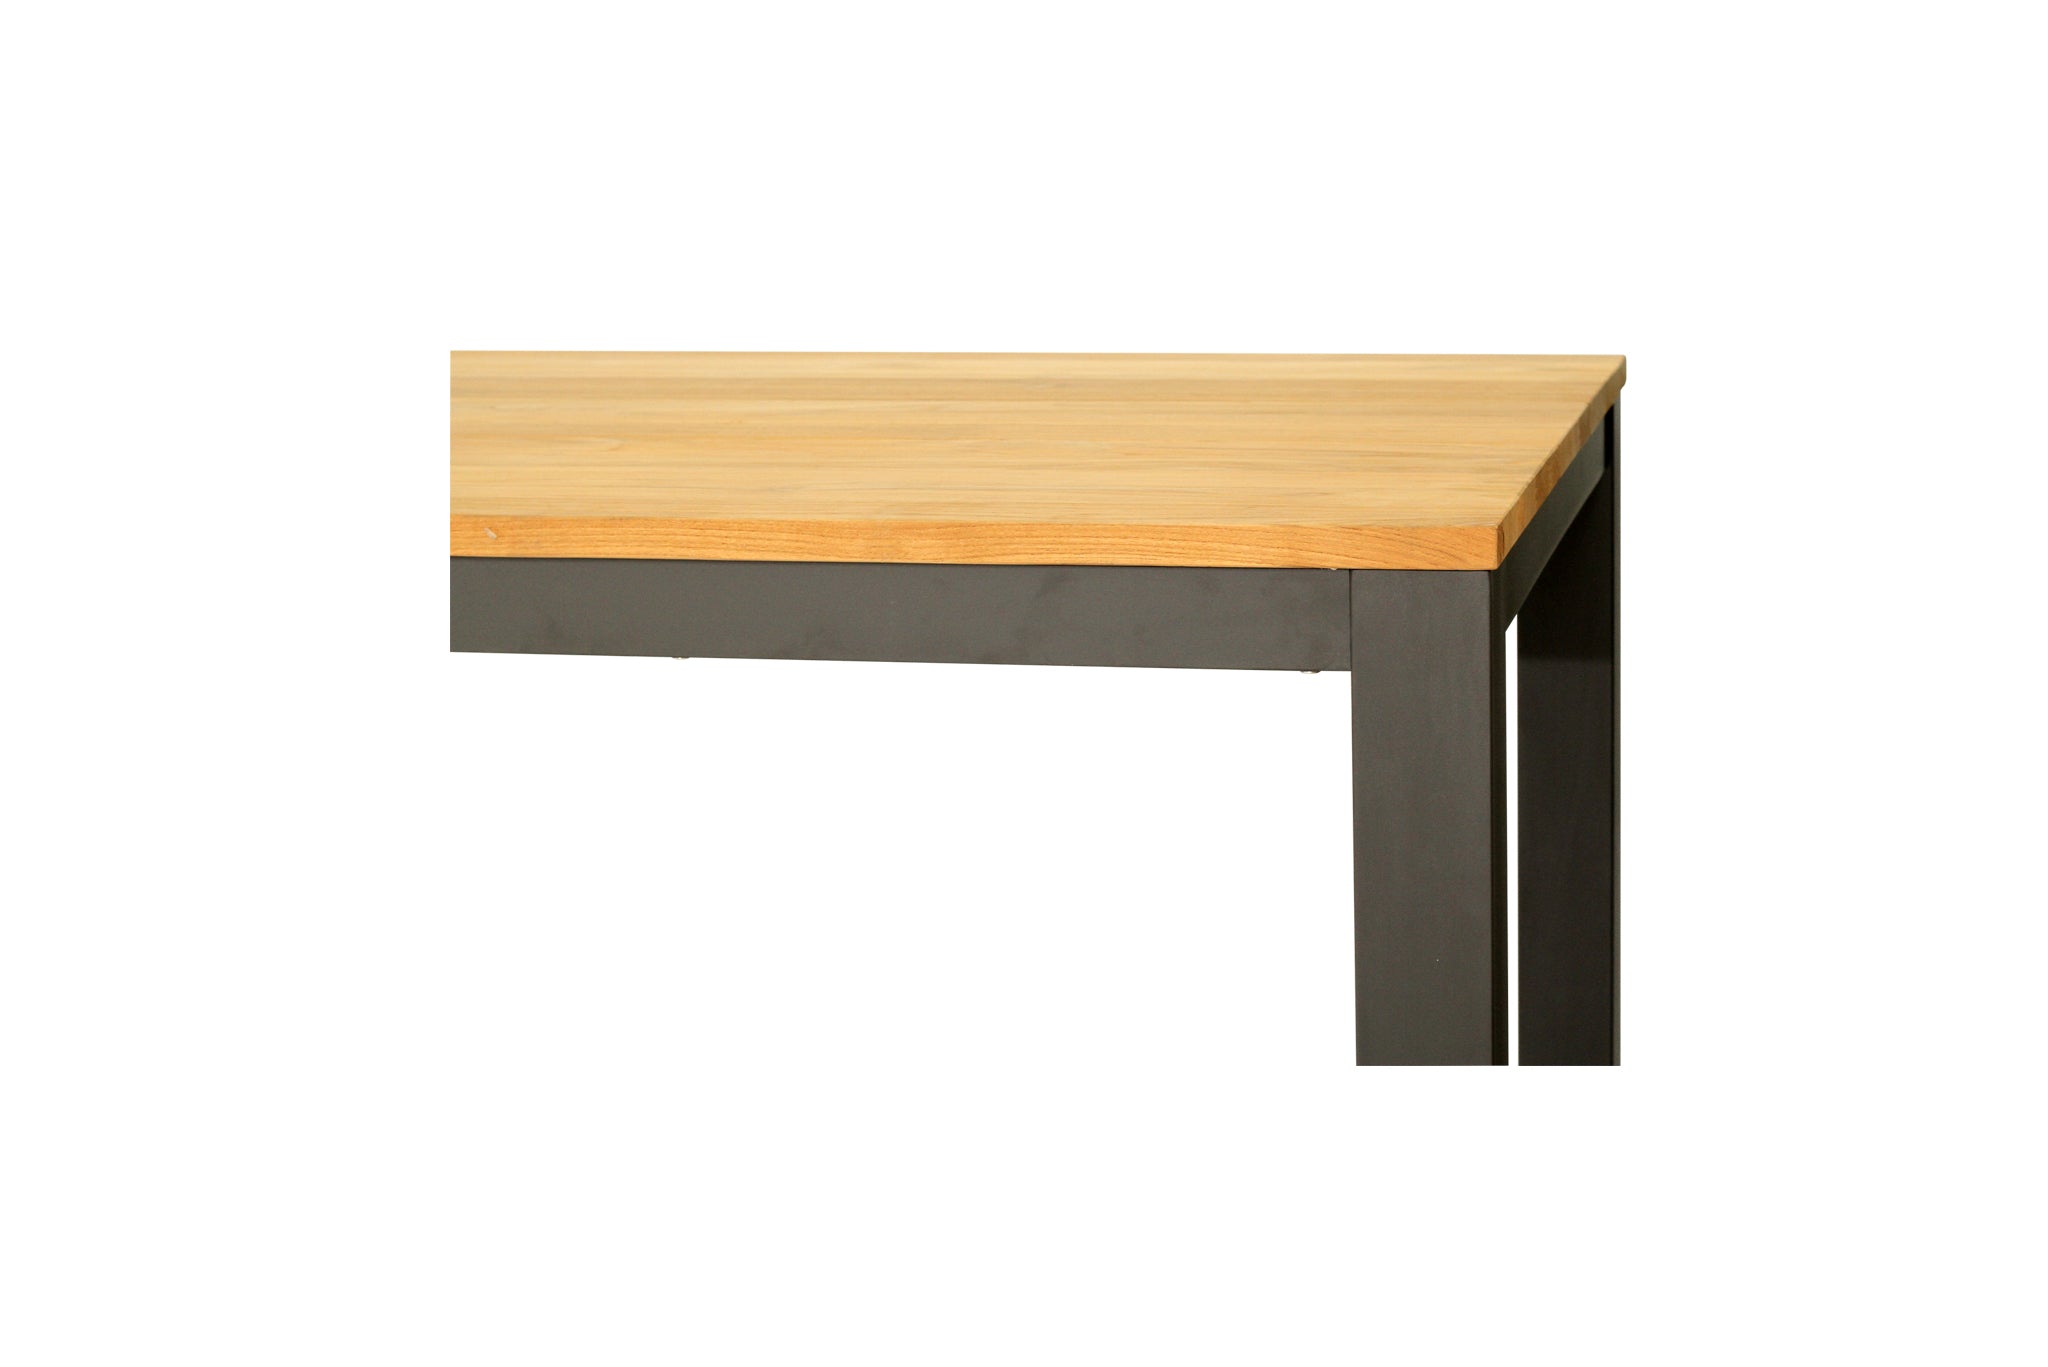 Rose Bay Outdoor Extension Table 3.1m – Asteroid Black (Charcoal) Powder Coated Legs